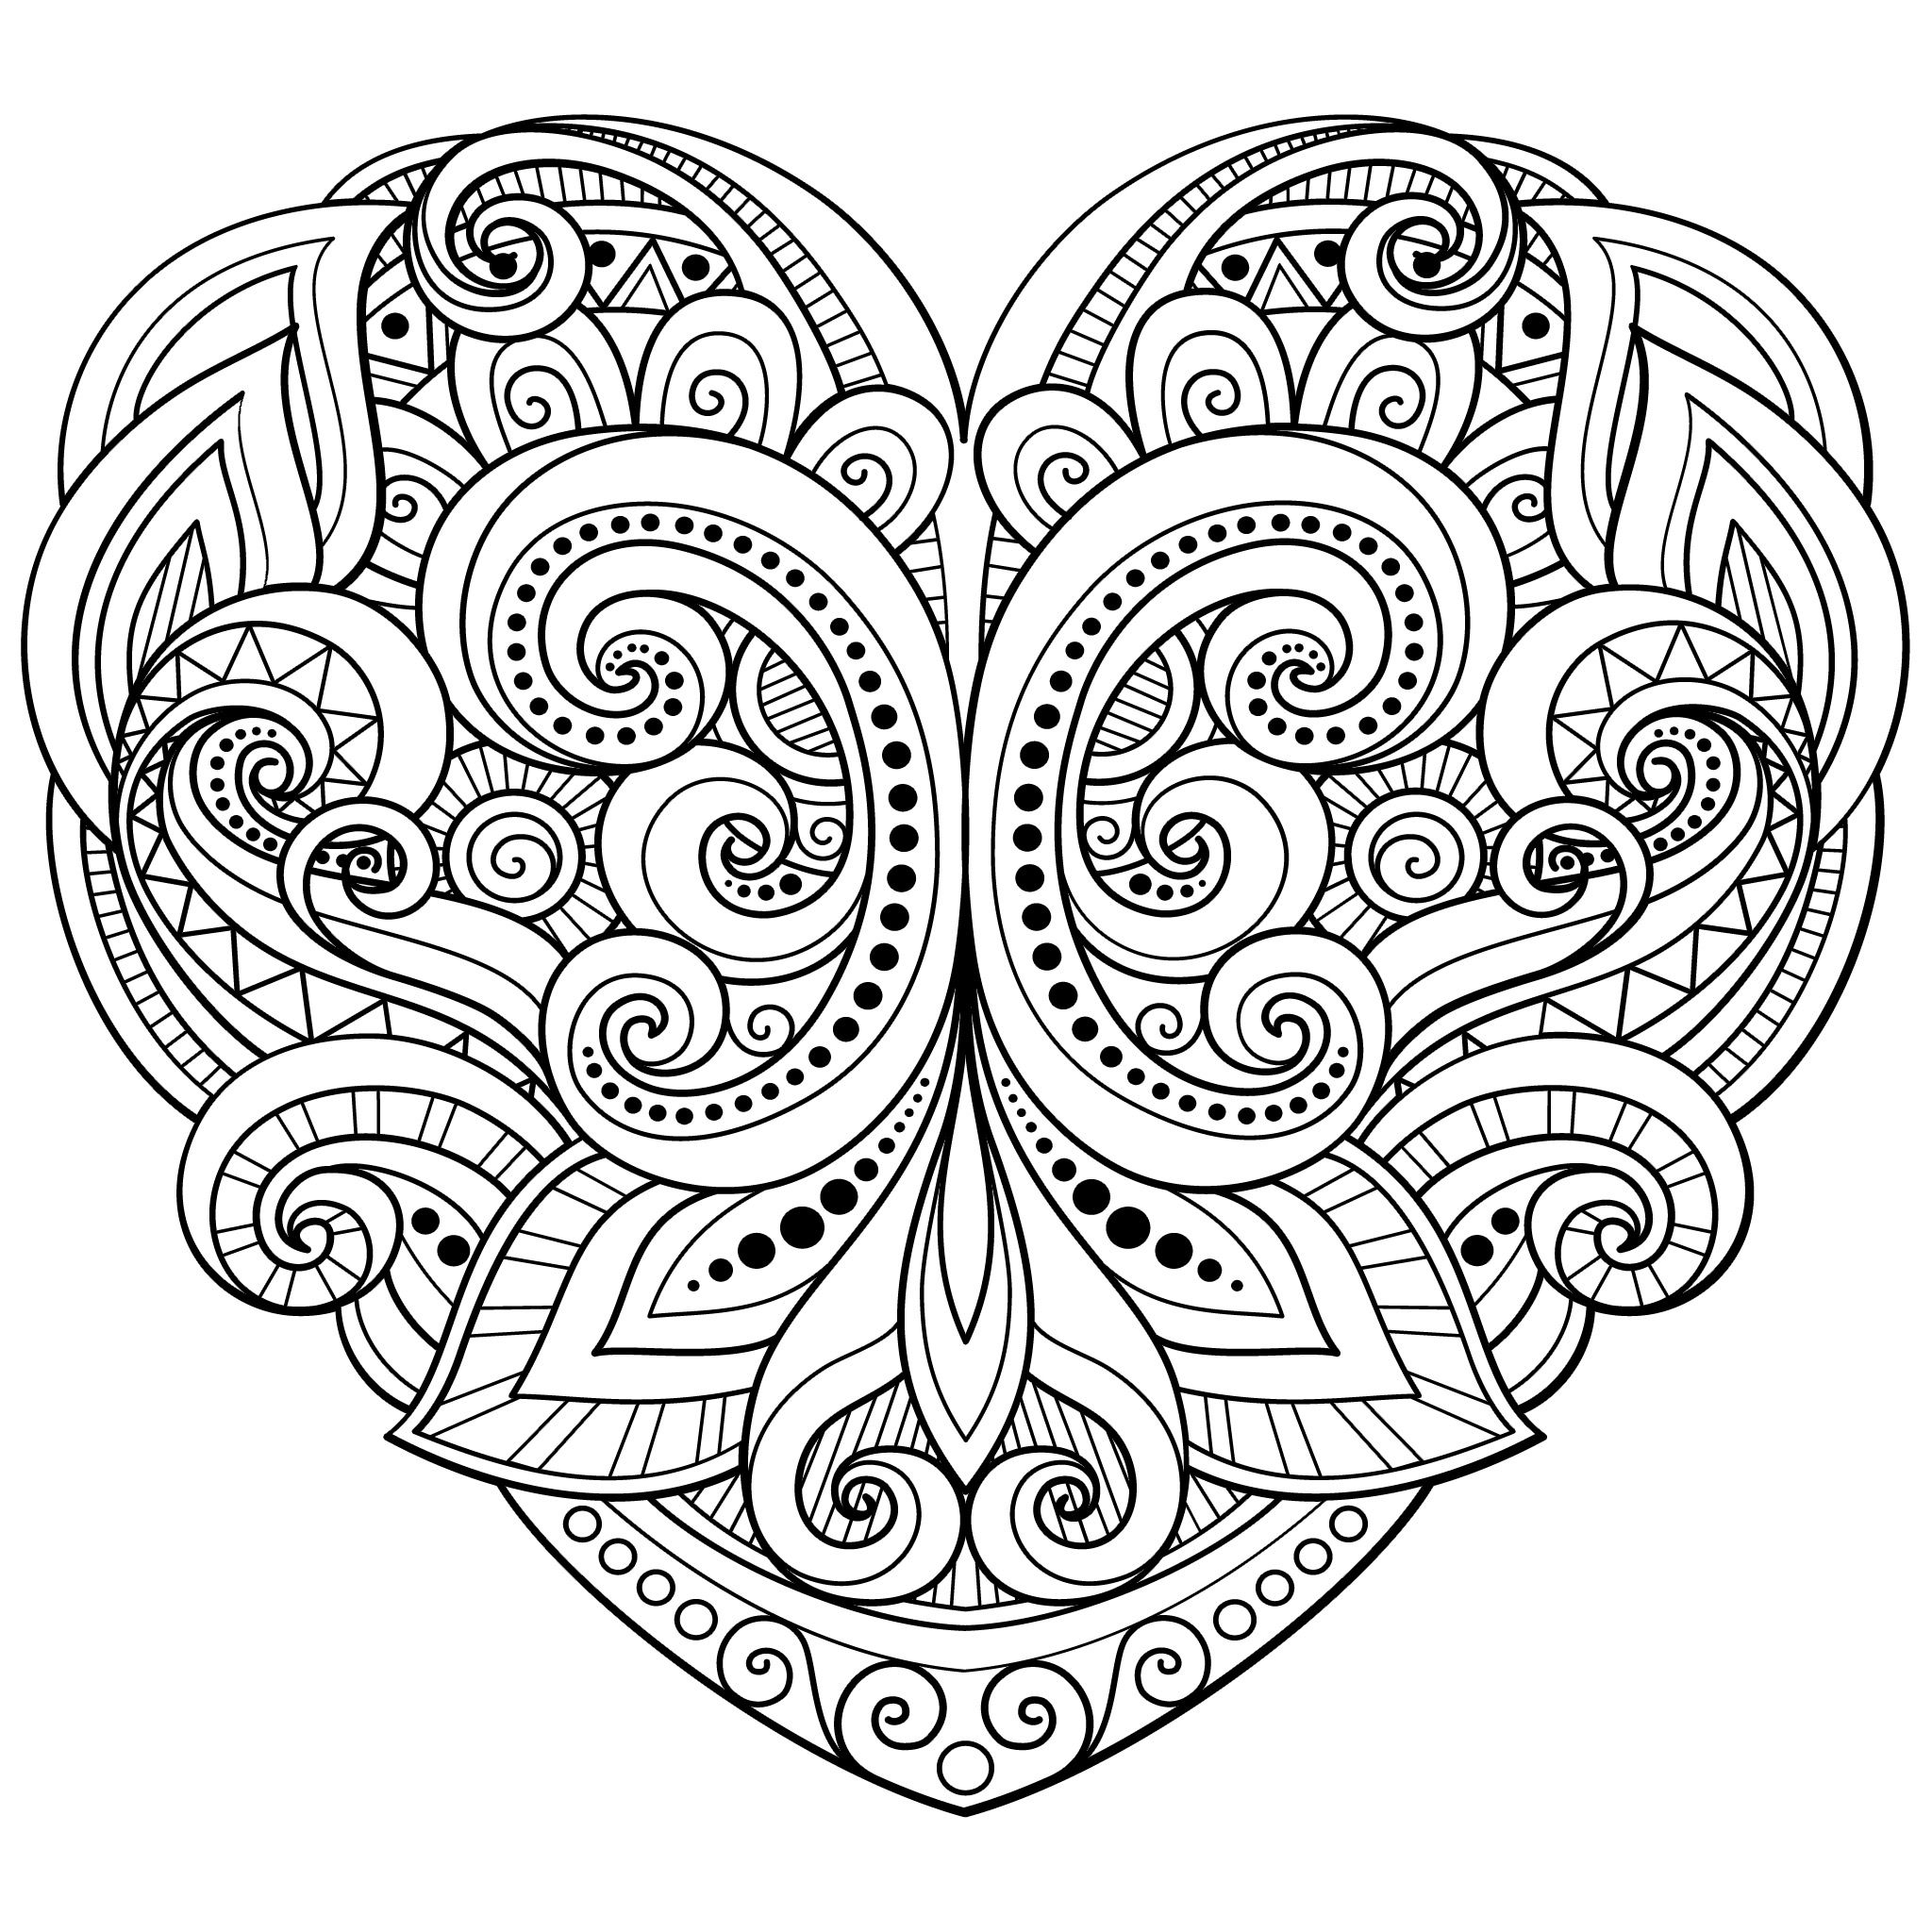 Heart Coloring Pages Pdf 7 Heart Coloring Pages For Adults Adult Coloring